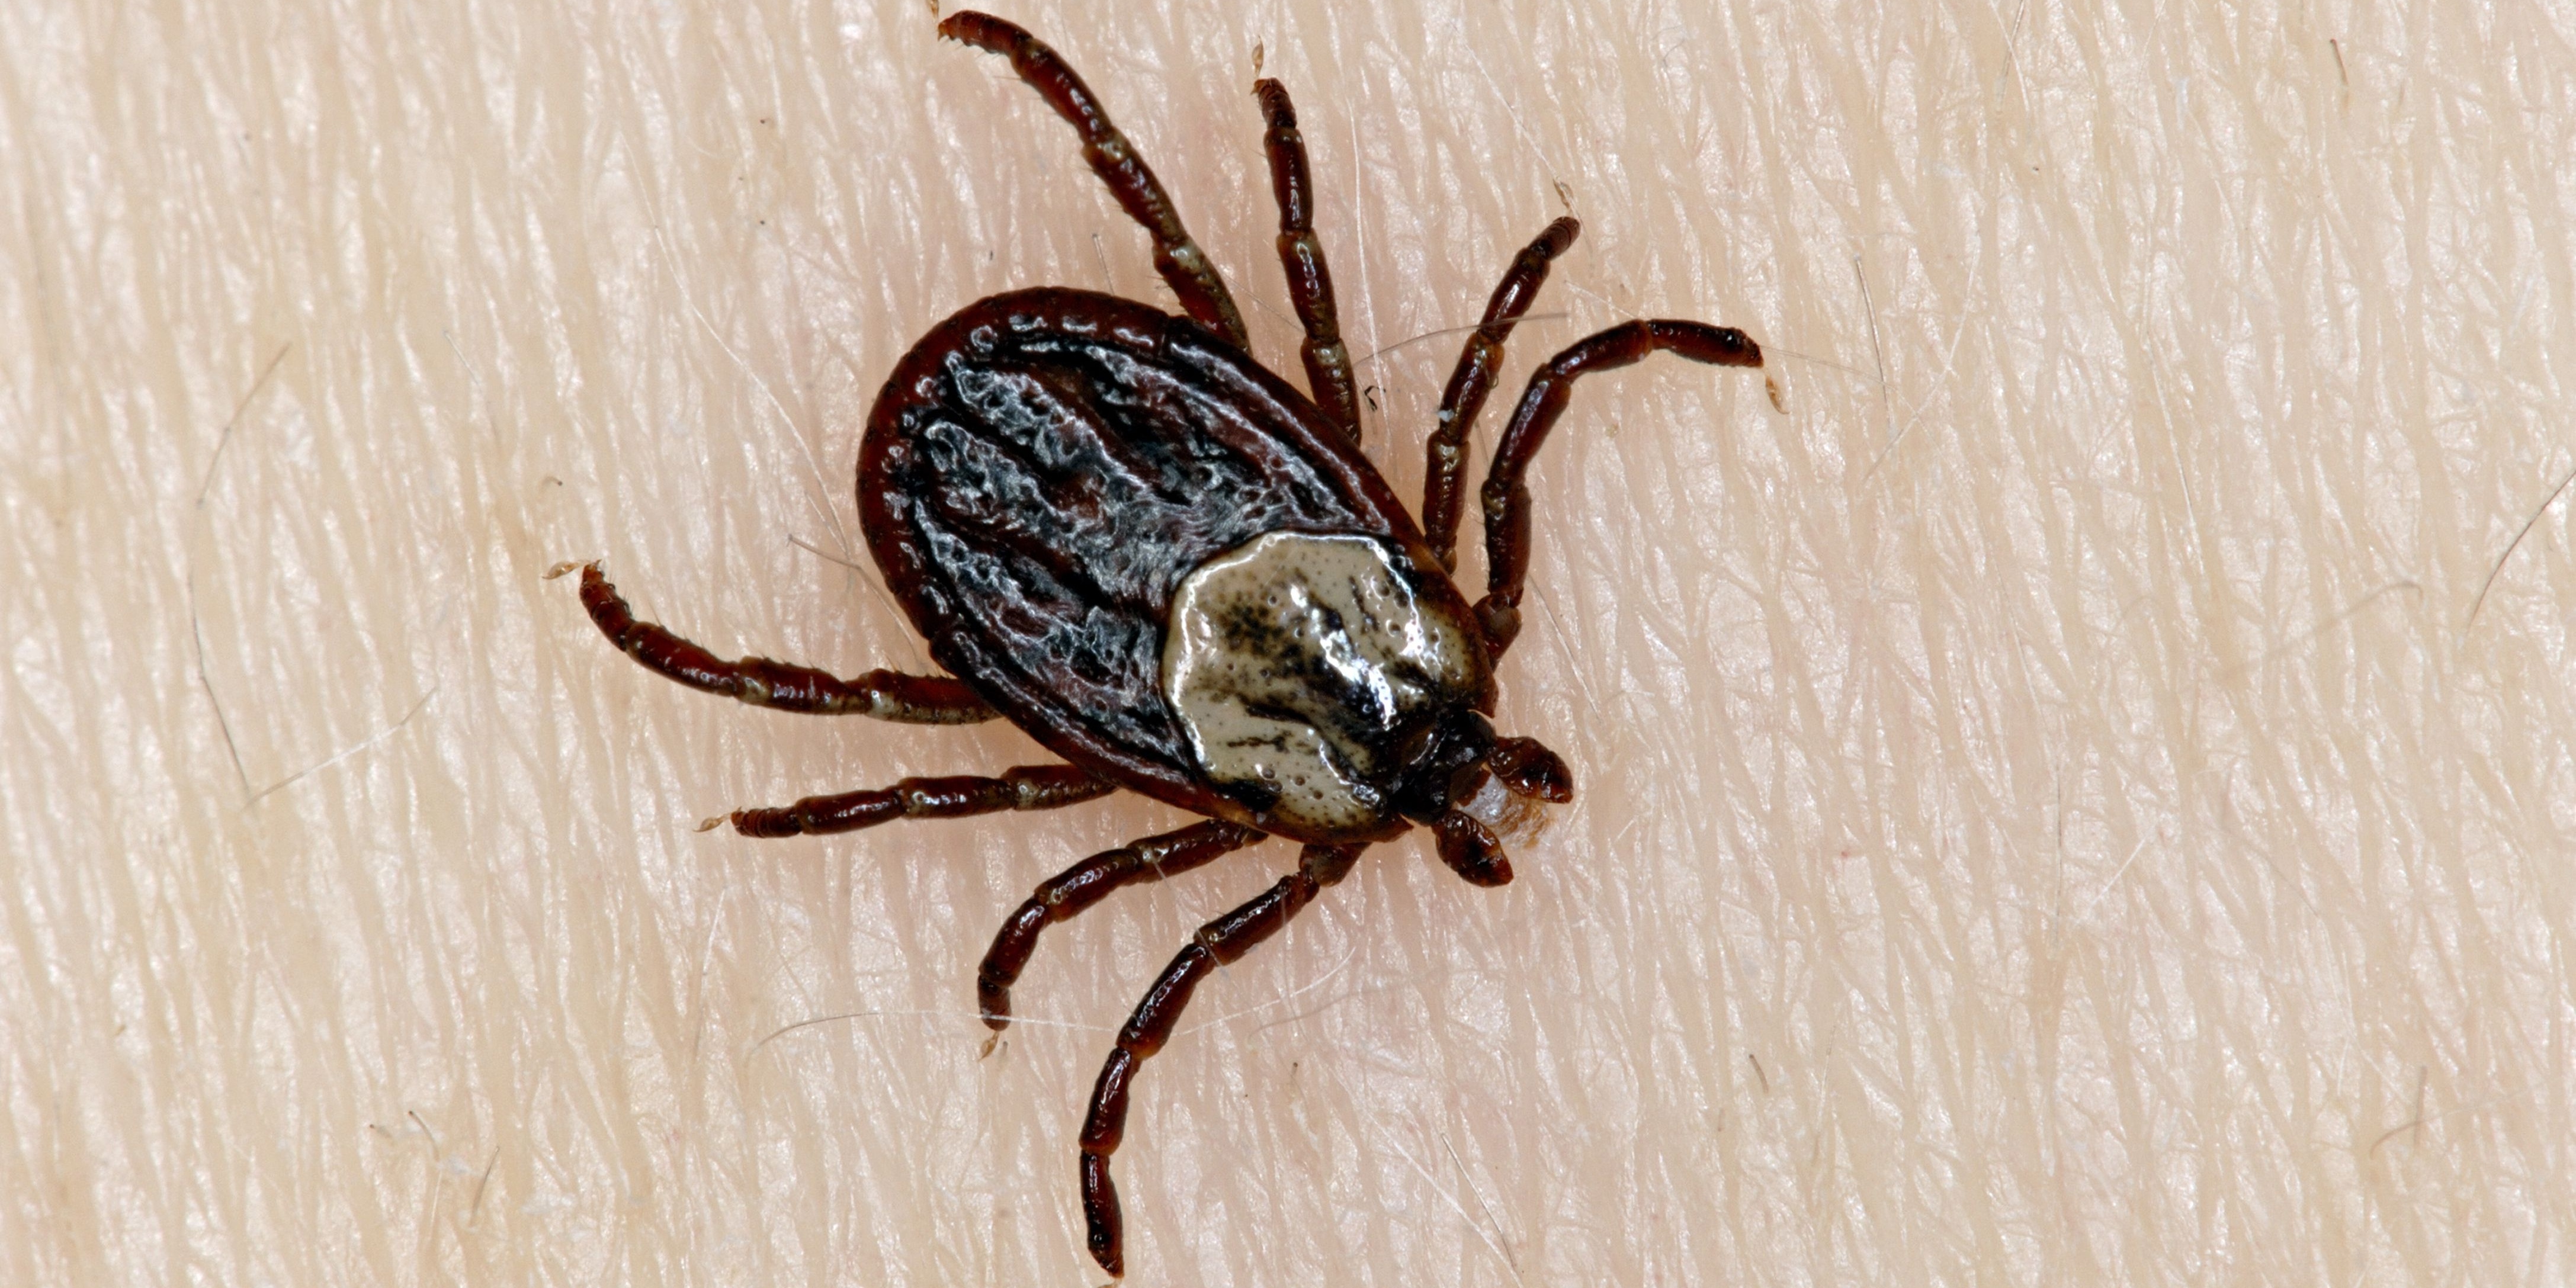 Ticks are known as "hard ticks" because both the males and females have a hard plate covering their backs.